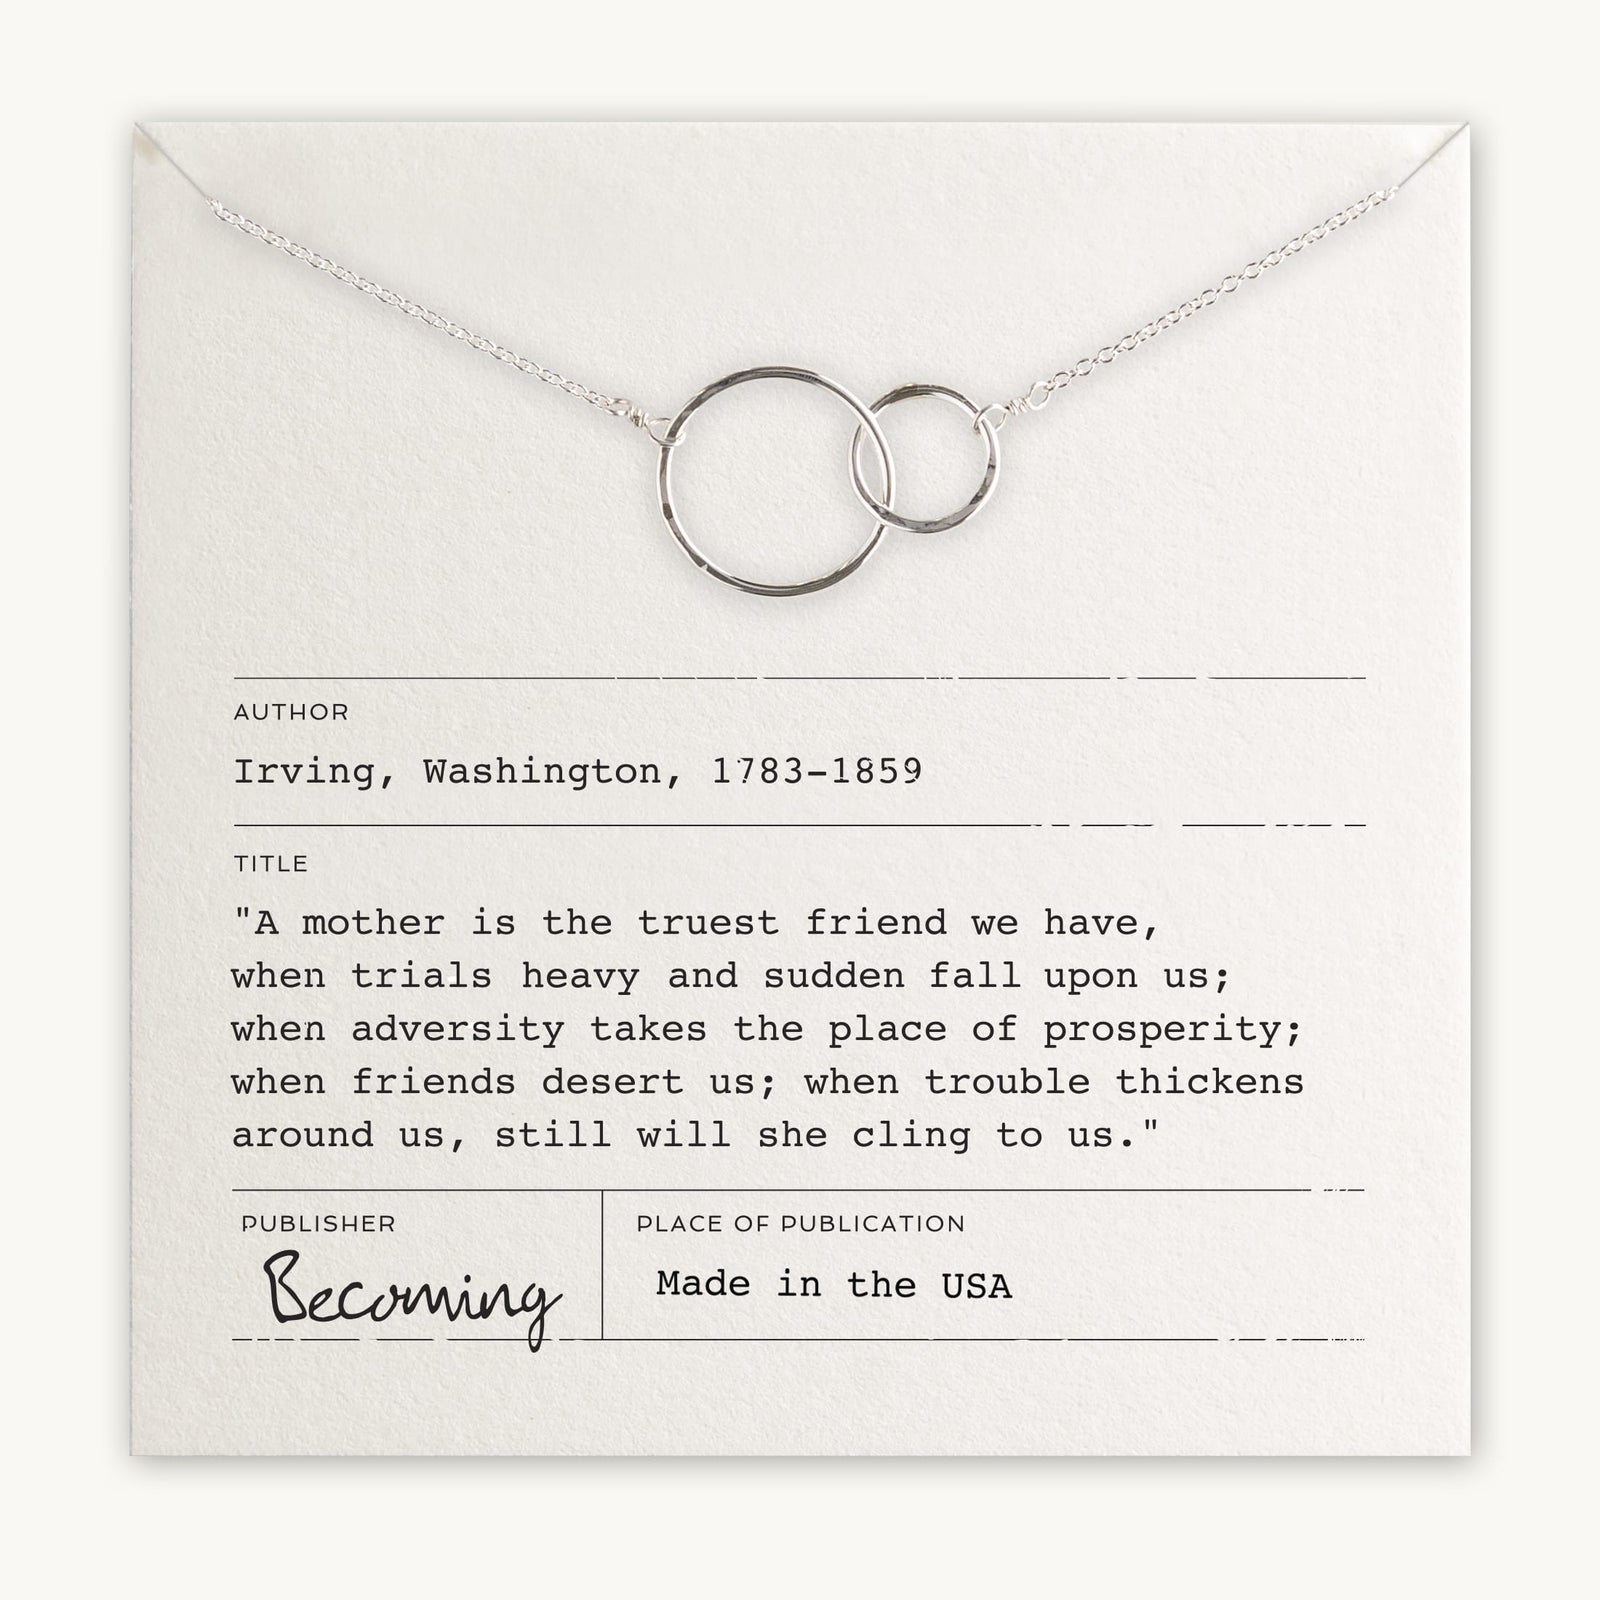 Becoming Jewelry's silver Mother Necklace with interlocking rings is laid on a card featuring a quote by Washington Irving.